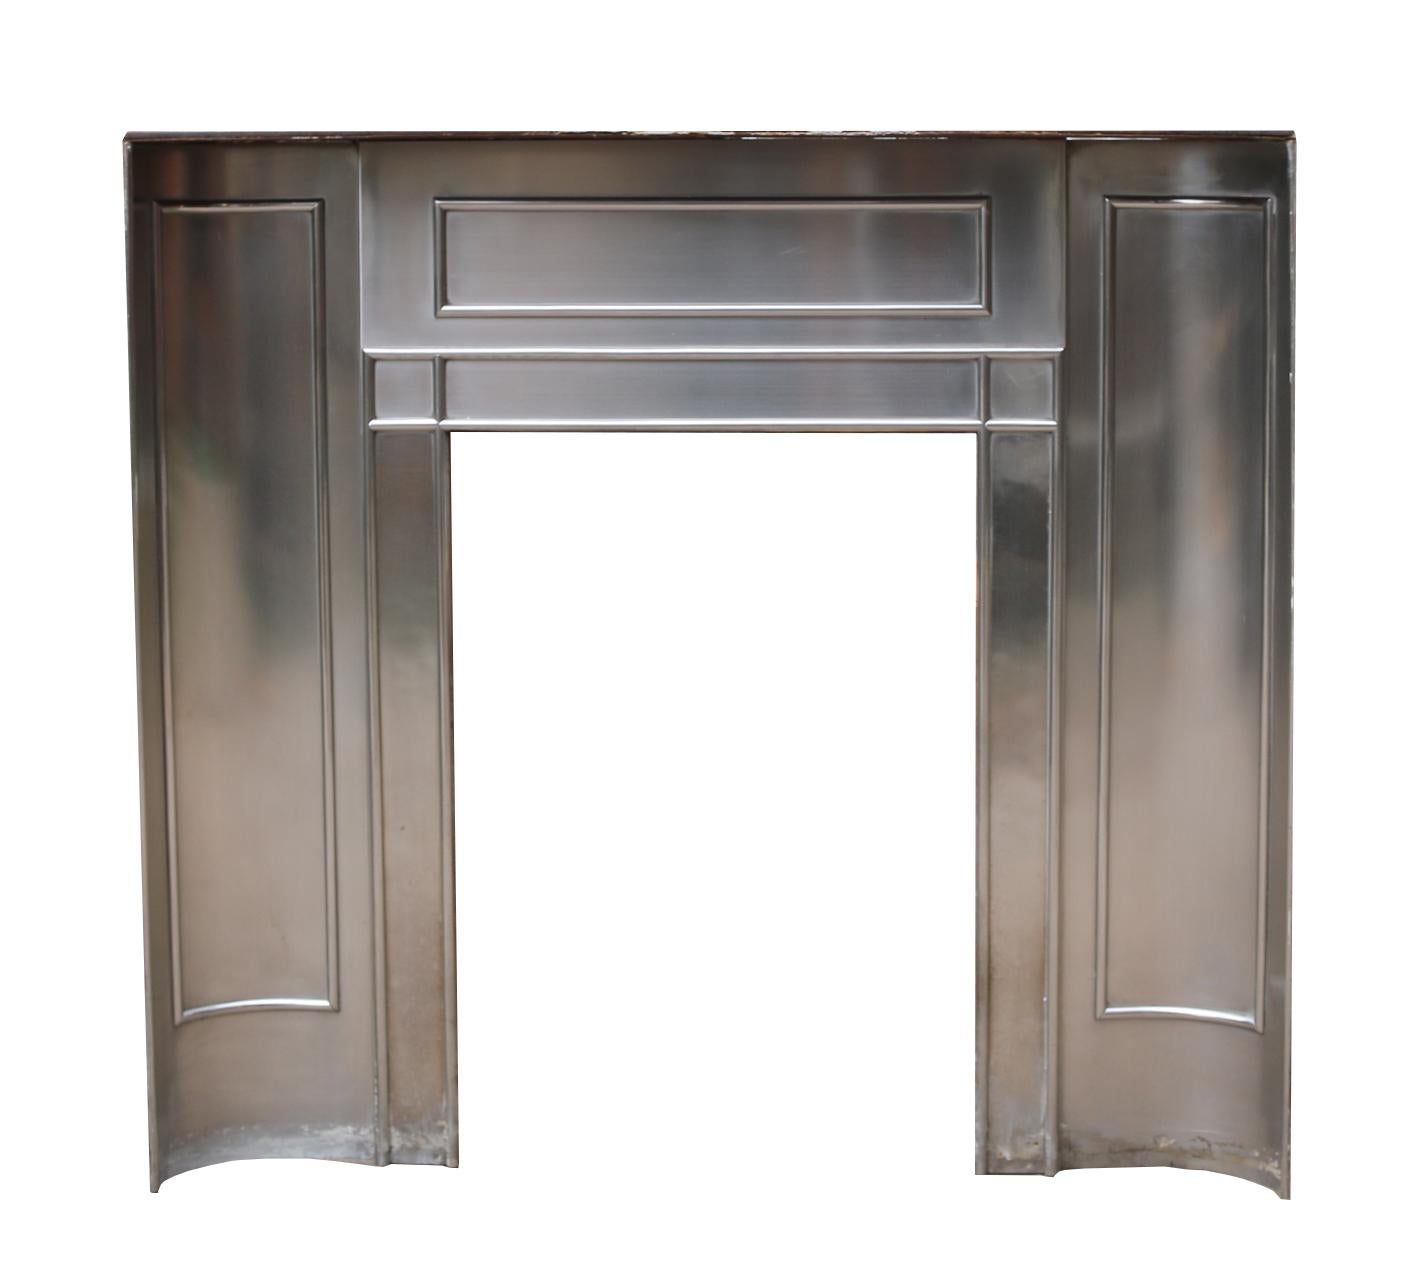 Antique Stainless Steel Fire Insert For Sale 1